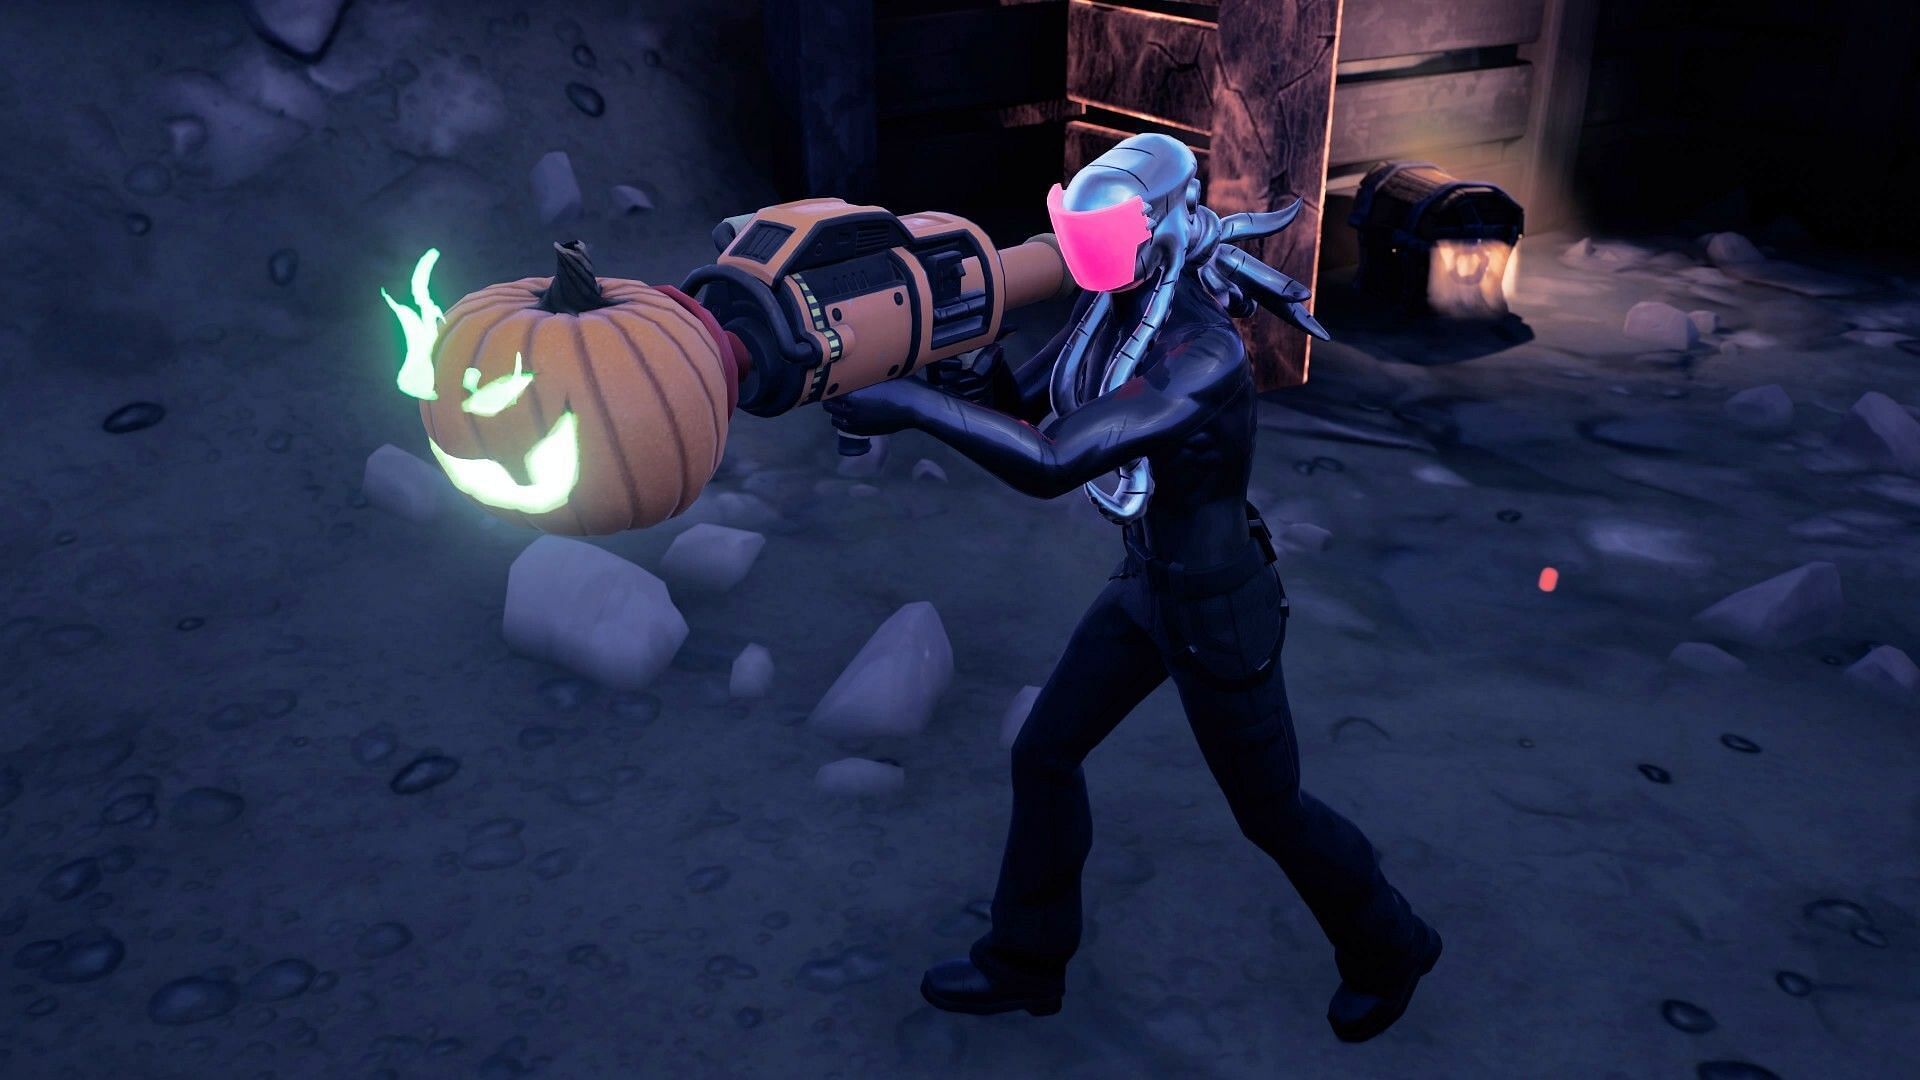 Curdle Scream Leader sells the Pumpkin Launcher for 600 Gold (Image via Epic Games)